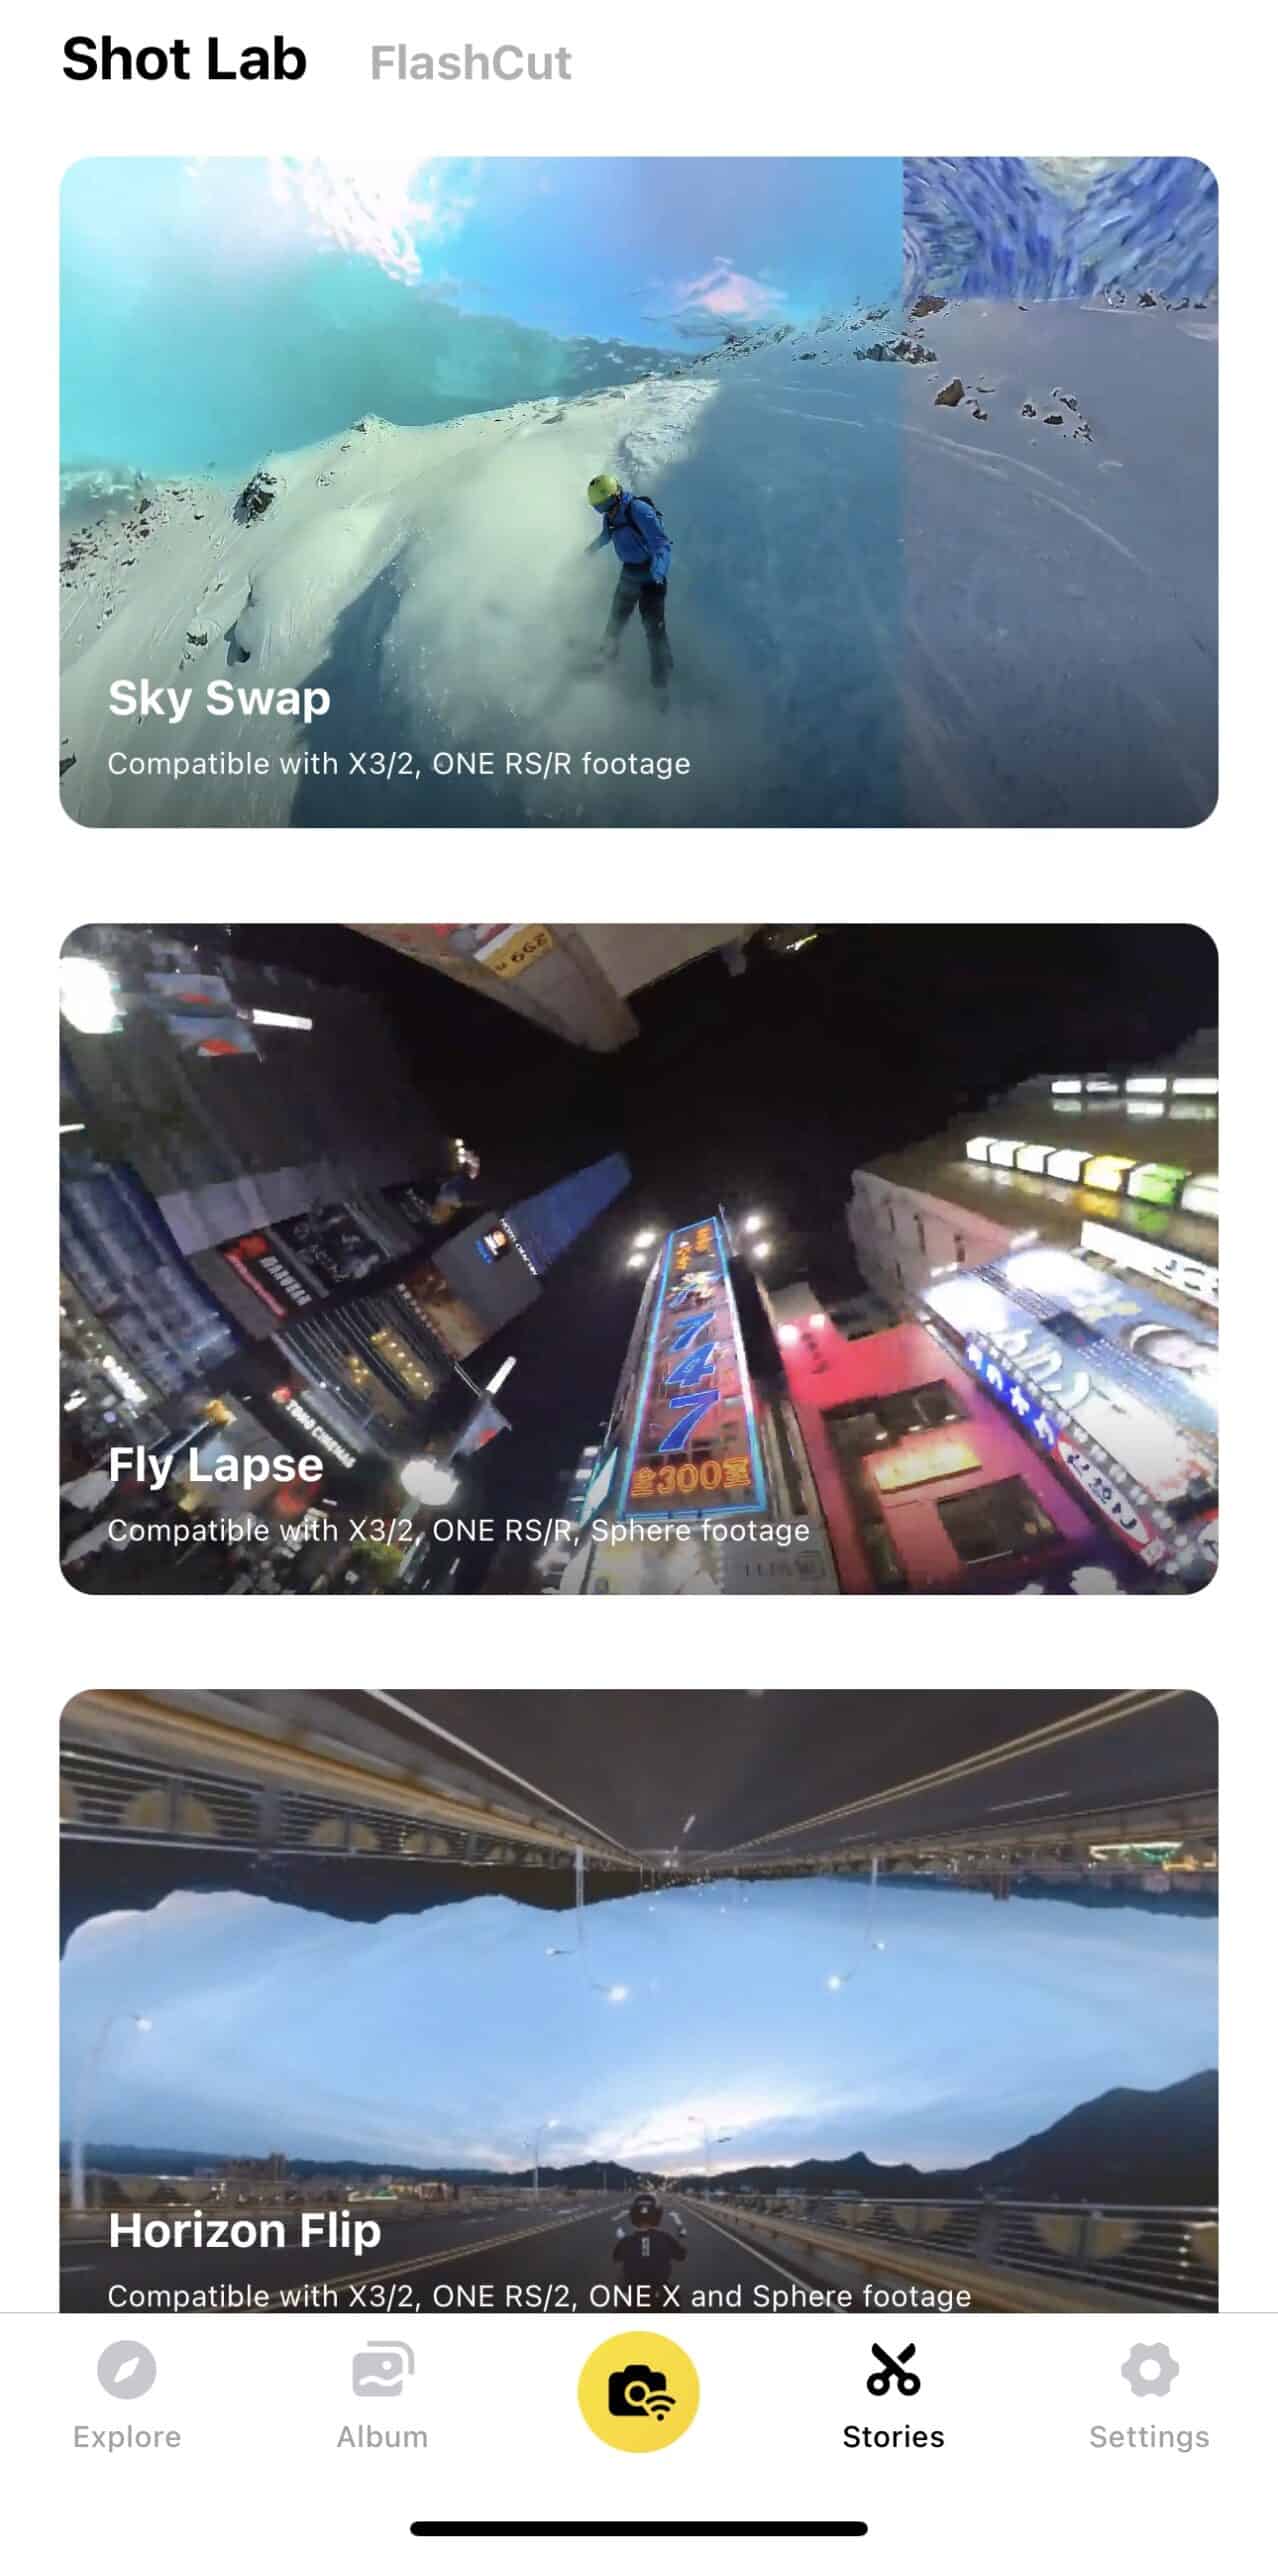 Insta360 phone app shot lab screen shot - example of sky swap, horizon flip and fly lapse as editing options